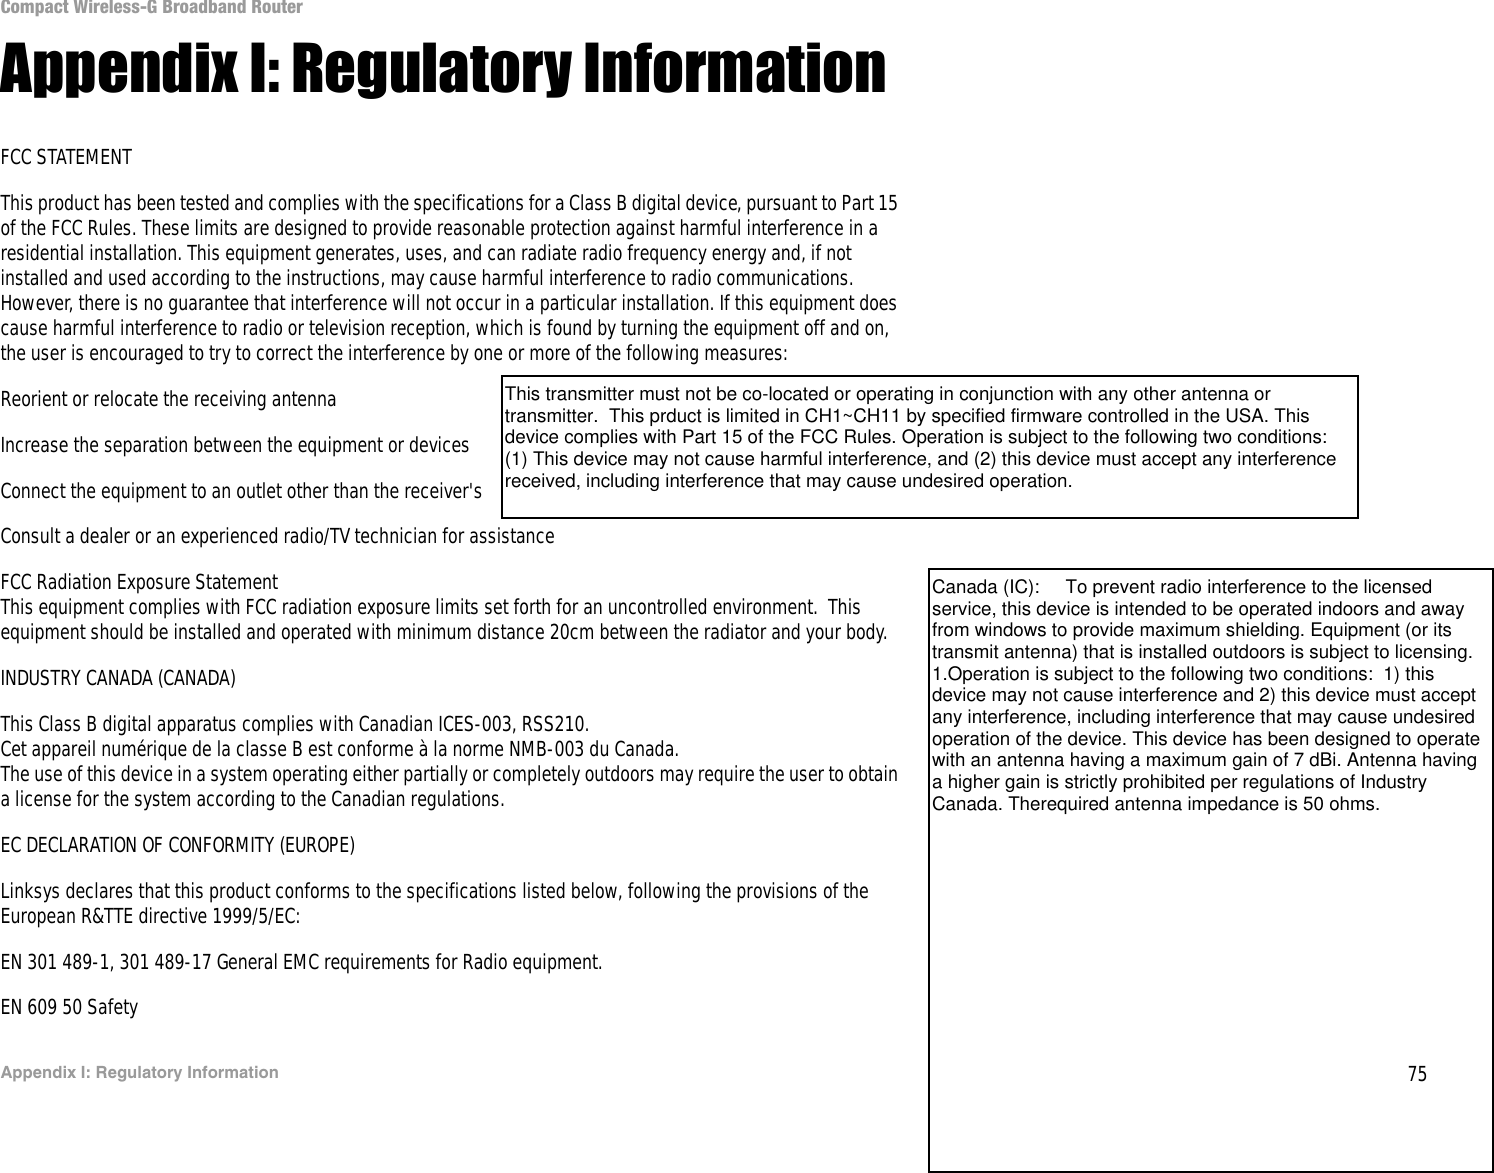 75Appendix I: Regulatory InformationCompact Wireless-G Broadband RouterAppendix I: Regulatory InformationFCC STATEMENTThis product has been tested and complies with the specifications for a Class B digital device, pursuant to Part 15 of the FCC Rules. These limits are designed to provide reasonable protection against harmful interference in a residential installation. This equipment generates, uses, and can radiate radio frequency energy and, if not installed and used according to the instructions, may cause harmful interference to radio communications. However, there is no guarantee that interference will not occur in a particular installation. If this equipment does cause harmful interference to radio or television reception, which is found by turning the equipment off and on, the user is encouraged to try to correct the interference by one or more of the following measures:Reorient or relocate the receiving antennaIncrease the separation between the equipment or devicesConnect the equipment to an outlet other than the receiver&apos;sConsult a dealer or an experienced radio/TV technician for assistanceFCC Radiation Exposure StatementThis equipment complies with FCC radiation exposure limits set forth for an uncontrolled environment.  This equipment should be installed and operated with minimum distance 20cm between the radiator and your body.  INDUSTRY CANADA (CANADA)This Class B digital apparatus complies with Canadian ICES-003, RSS210.Cet appareil numérique de la classe B est conforme à la norme NMB-003 du Canada.The use of this device in a system operating either partially or completely outdoors may require the user to obtain a license for the system according to the Canadian regulations.EC DECLARATION OF CONFORMITY (EUROPE)Linksys declares that this product conforms to the specifications listed below, following the provisions of the European R&amp;TTE directive 1999/5/EC: EN 301 489-1, 301 489-17 General EMC requirements for Radio equipment.EN 609 50 SafetyThis transmitter must not be co-located or operating in conjunction with any other antenna or transmitter.  This prduct is limited in CH1~CH11 by specified firmware controlled in the USA. This device complies with Part 15 of the FCC Rules. Operation is subject to the following two conditions: (1) This device may not cause harmful interference, and (2) this device must accept any interference received, including interference that may cause undesired operation.Canada (IC):     To prevent radio interference to the licensed service, this device is intended to be operated indoors and away from windows to provide maximum shielding. Equipment (or its transmit antenna) that is installed outdoors is subject to licensing. 1.Operation is subject to the following two conditions:  1) this device may not cause interference and 2) this device must accept any interference, including interference that may cause undesired operation of the device. This device has been designed to operate with an antenna having a maximum gain of 7 dBi. Antenna having a higher gain is strictly prohibited per regulations of Industry Canada. Therequired antenna impedance is 50 ohms.